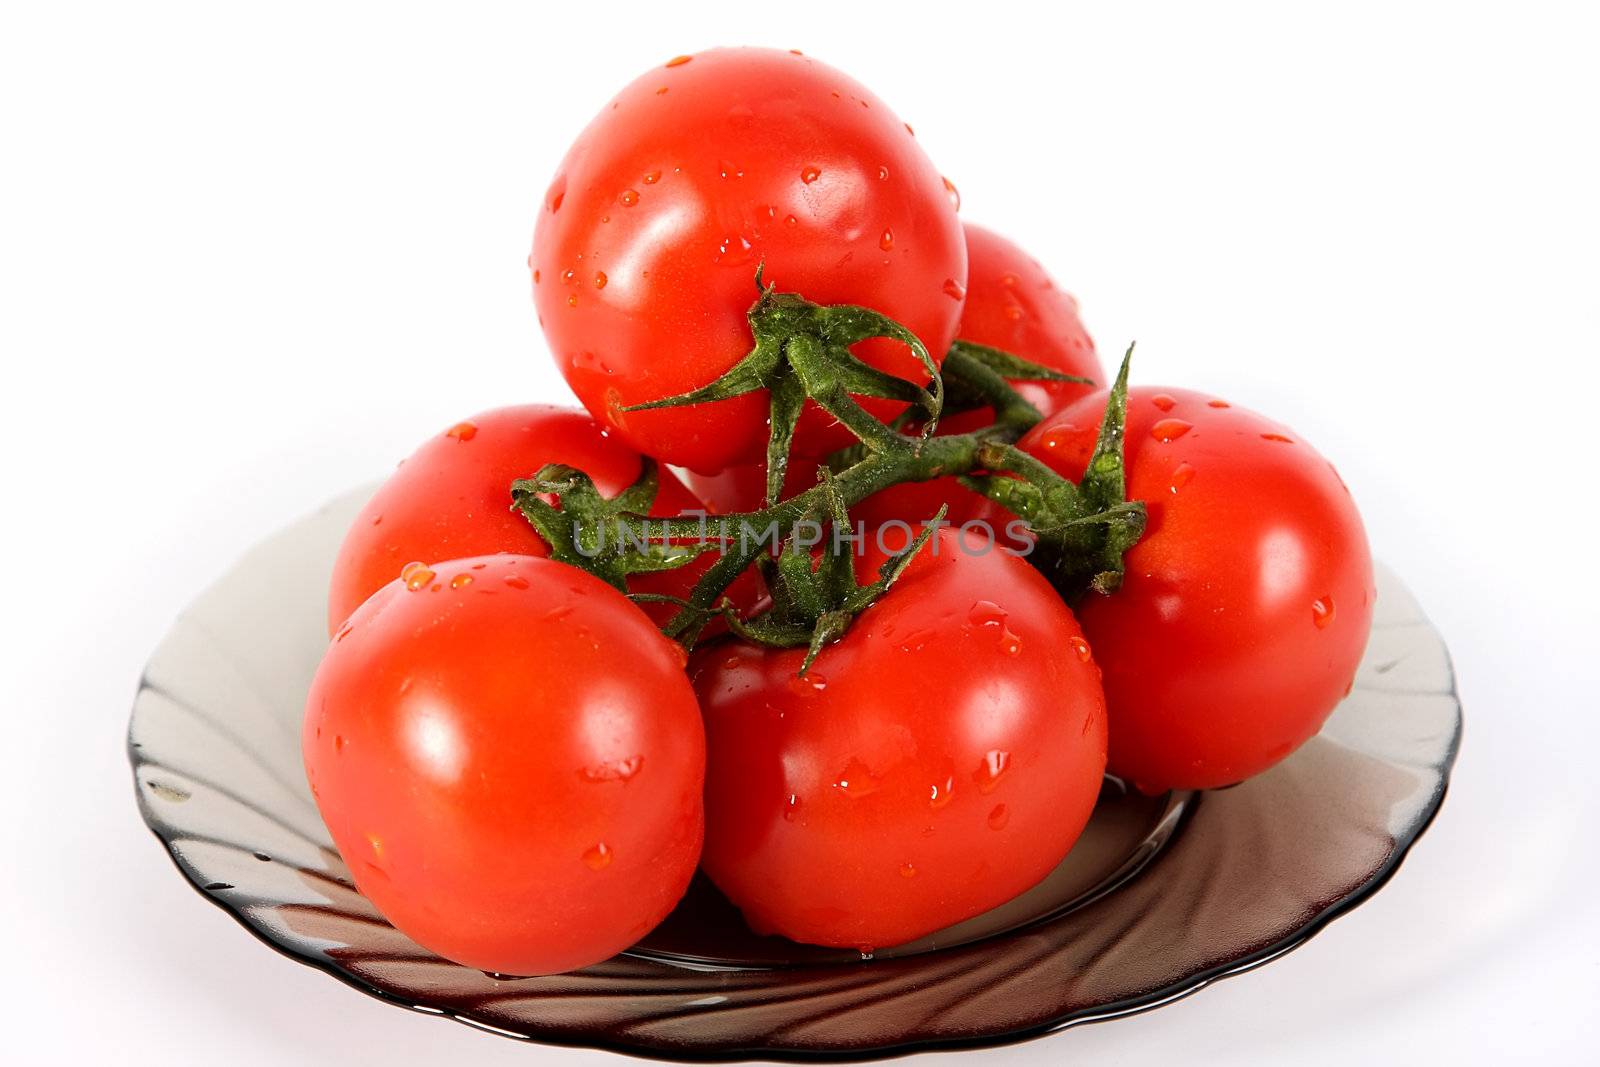 Tomatoes on a plate on a white background